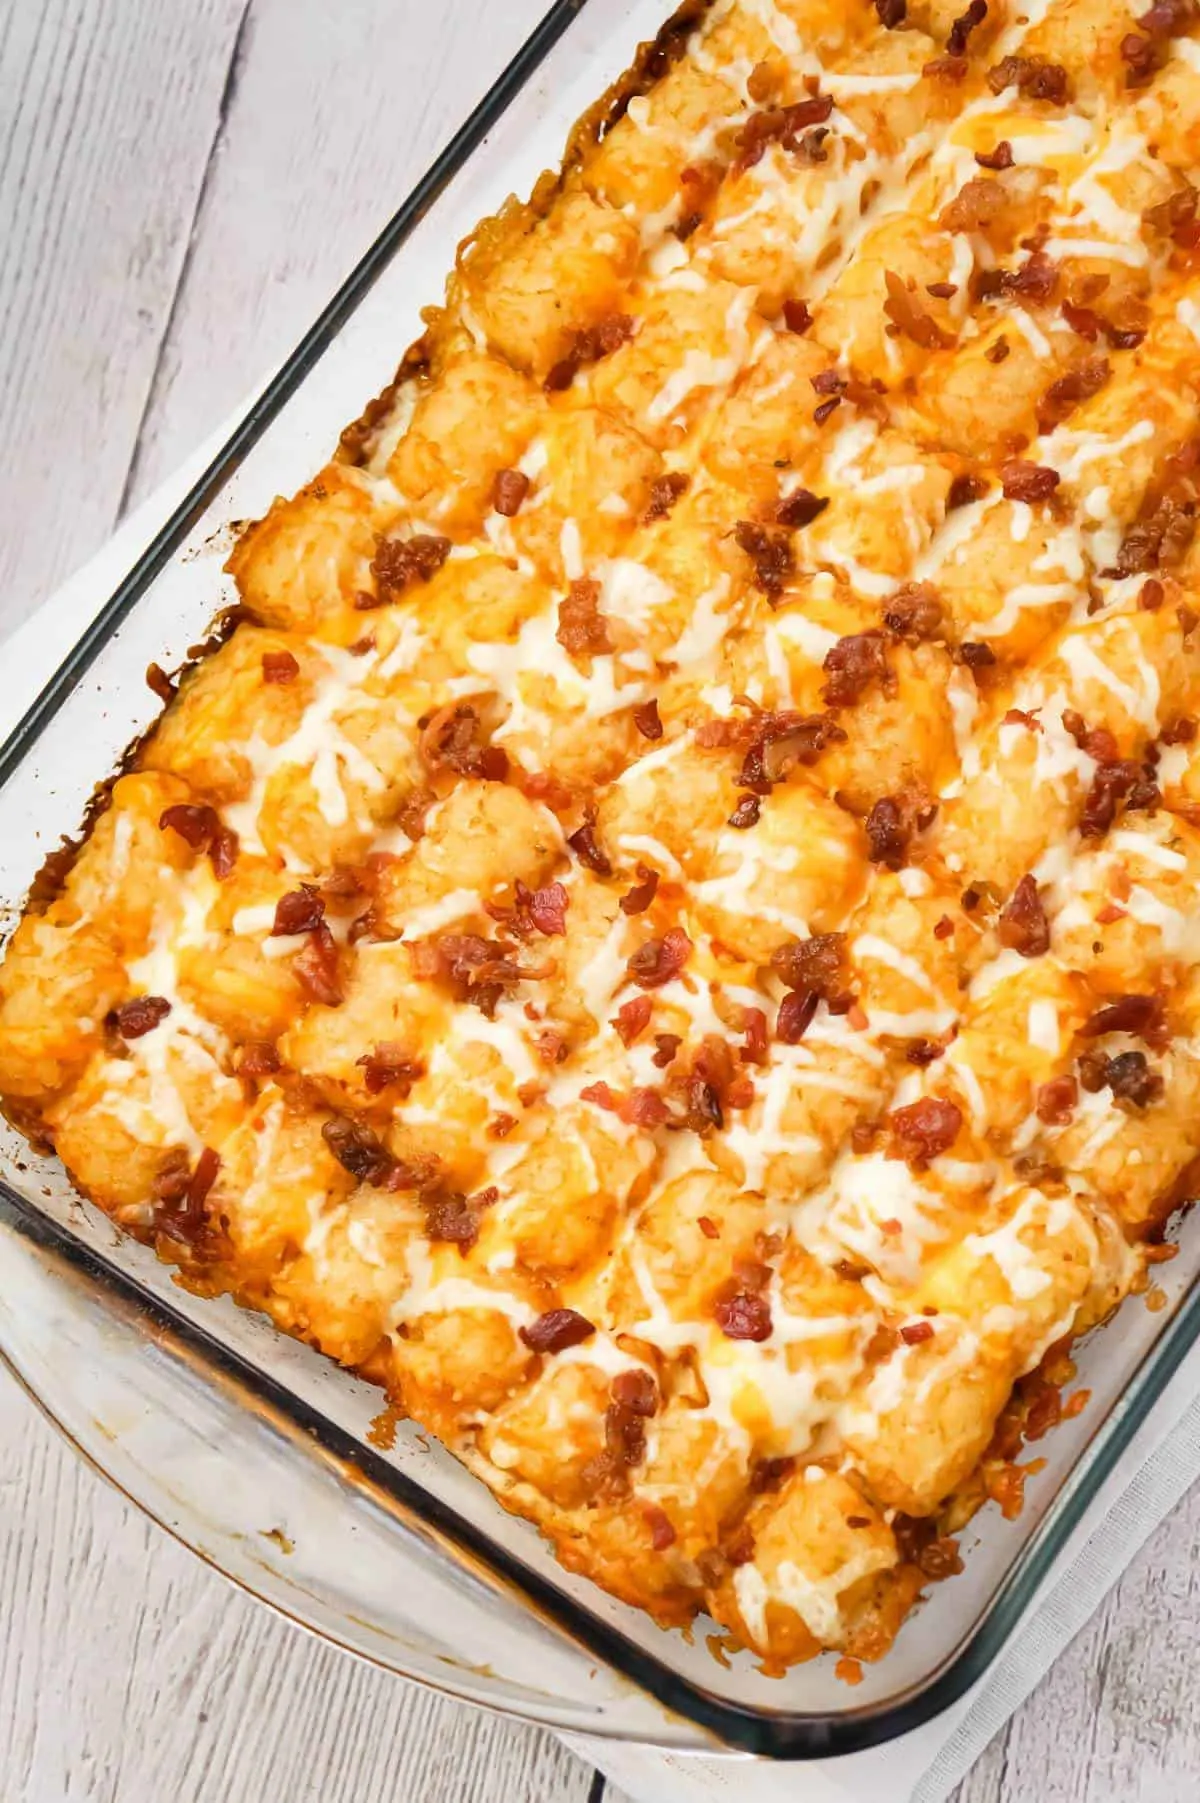 Bacon Cheeseburger Tater Tot Casserole is an easy ground beef dinner recipe loaded with crumbled bacon and cheese, and topped with crispy tater tots.